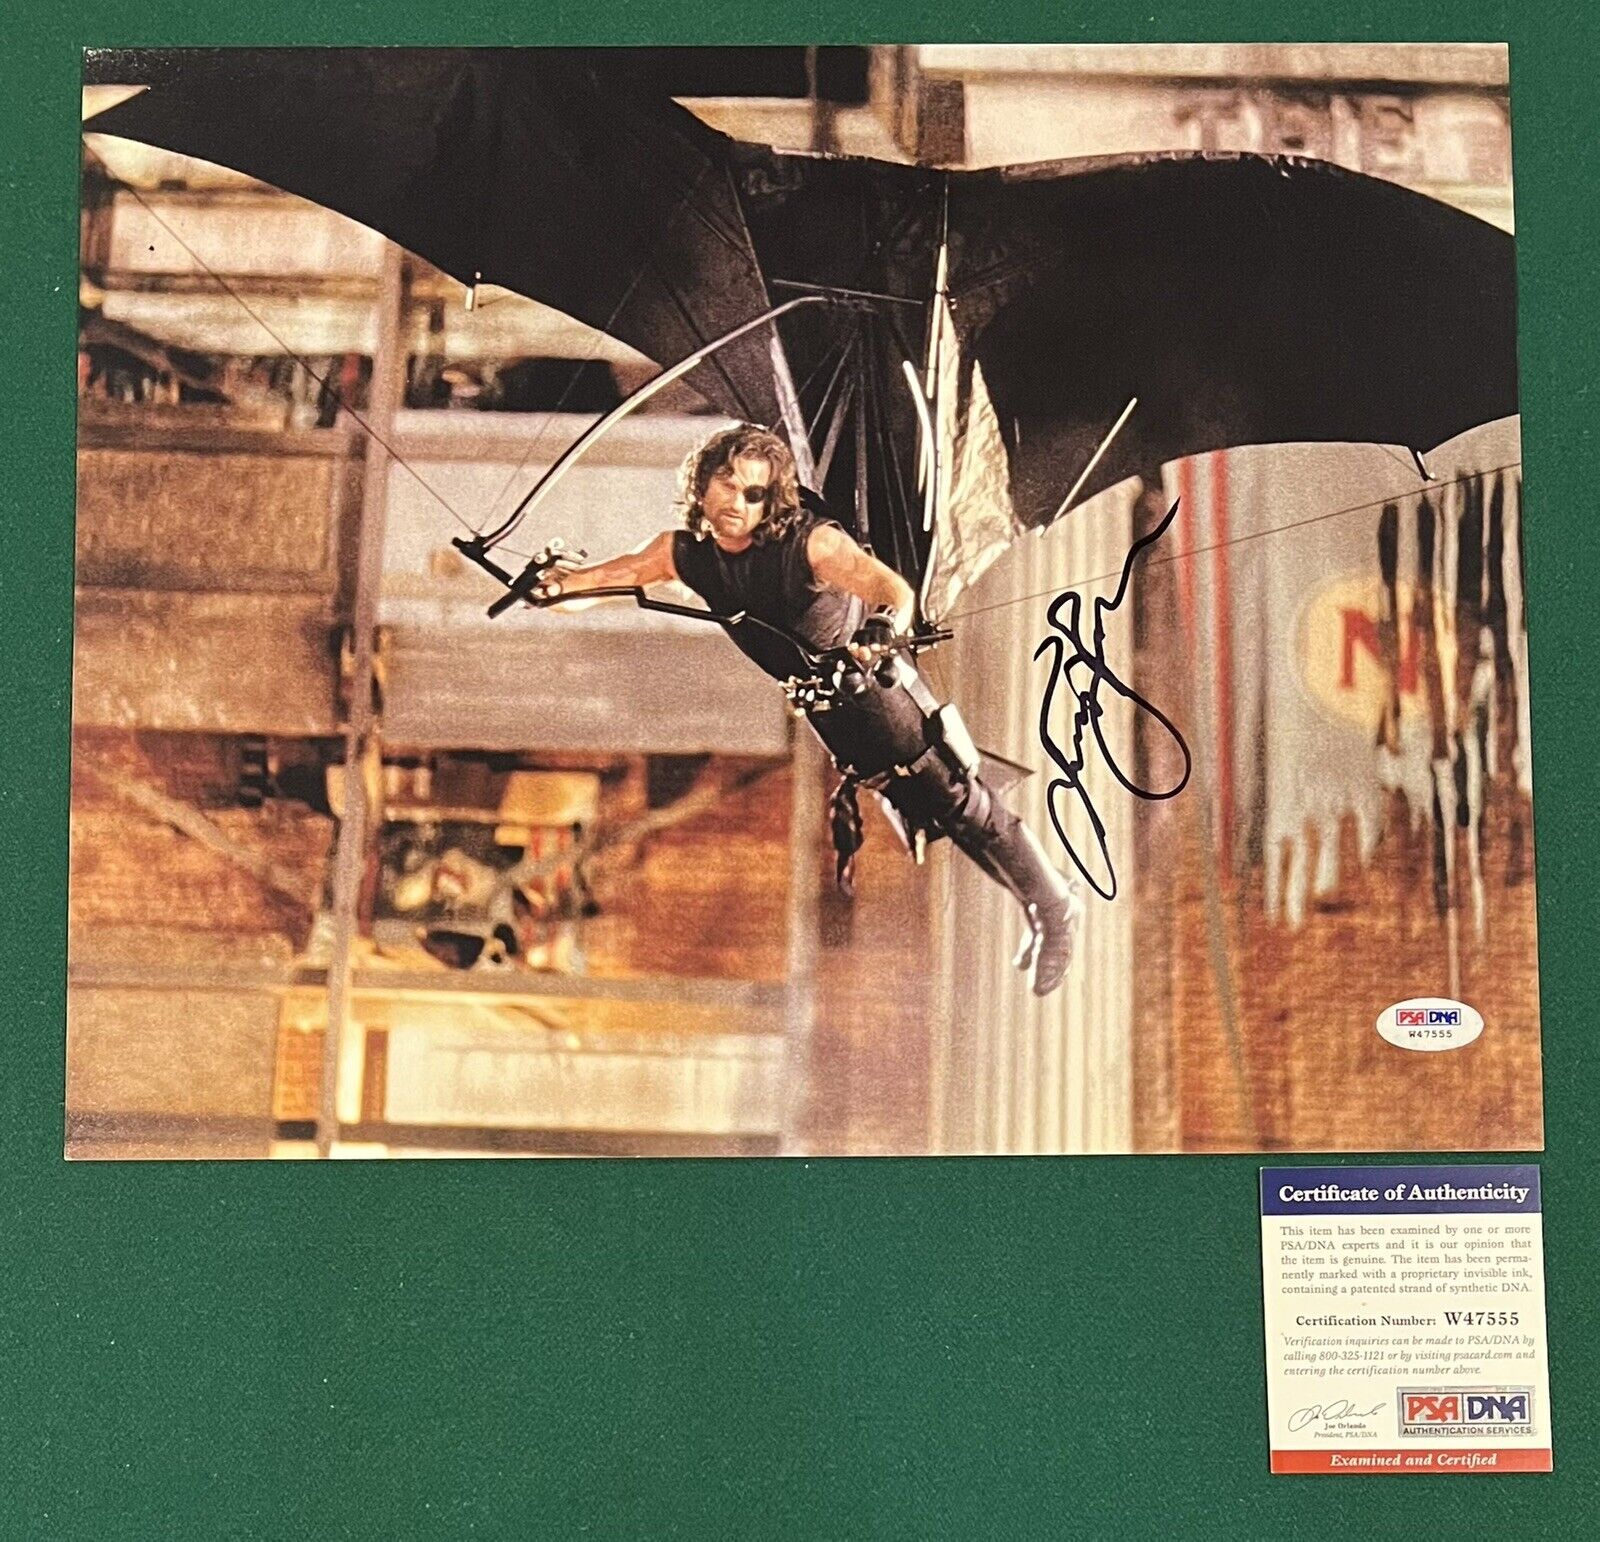 Kurt Russell Signed Escape From L.A. 11x14 Autograph PSA/DNA Certified#W47555